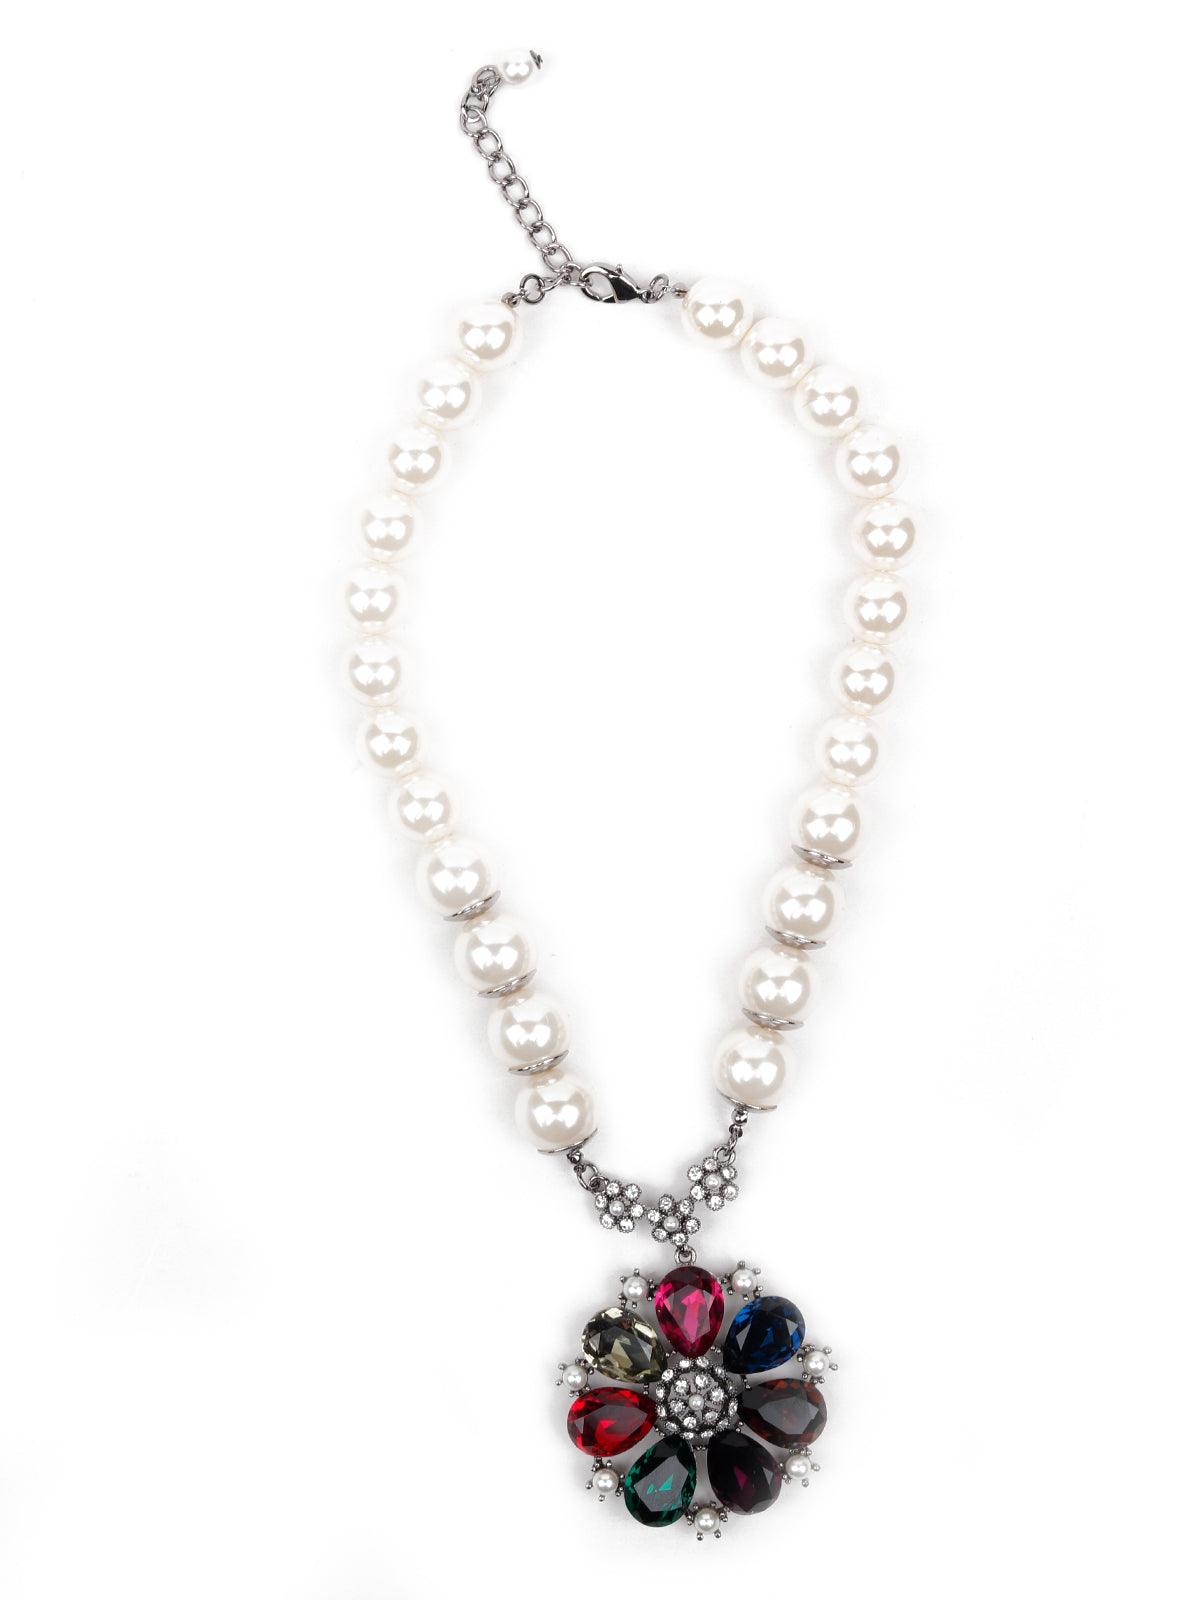 Women's Artificial Pearl Necklace With A Floral Pendant - Odette